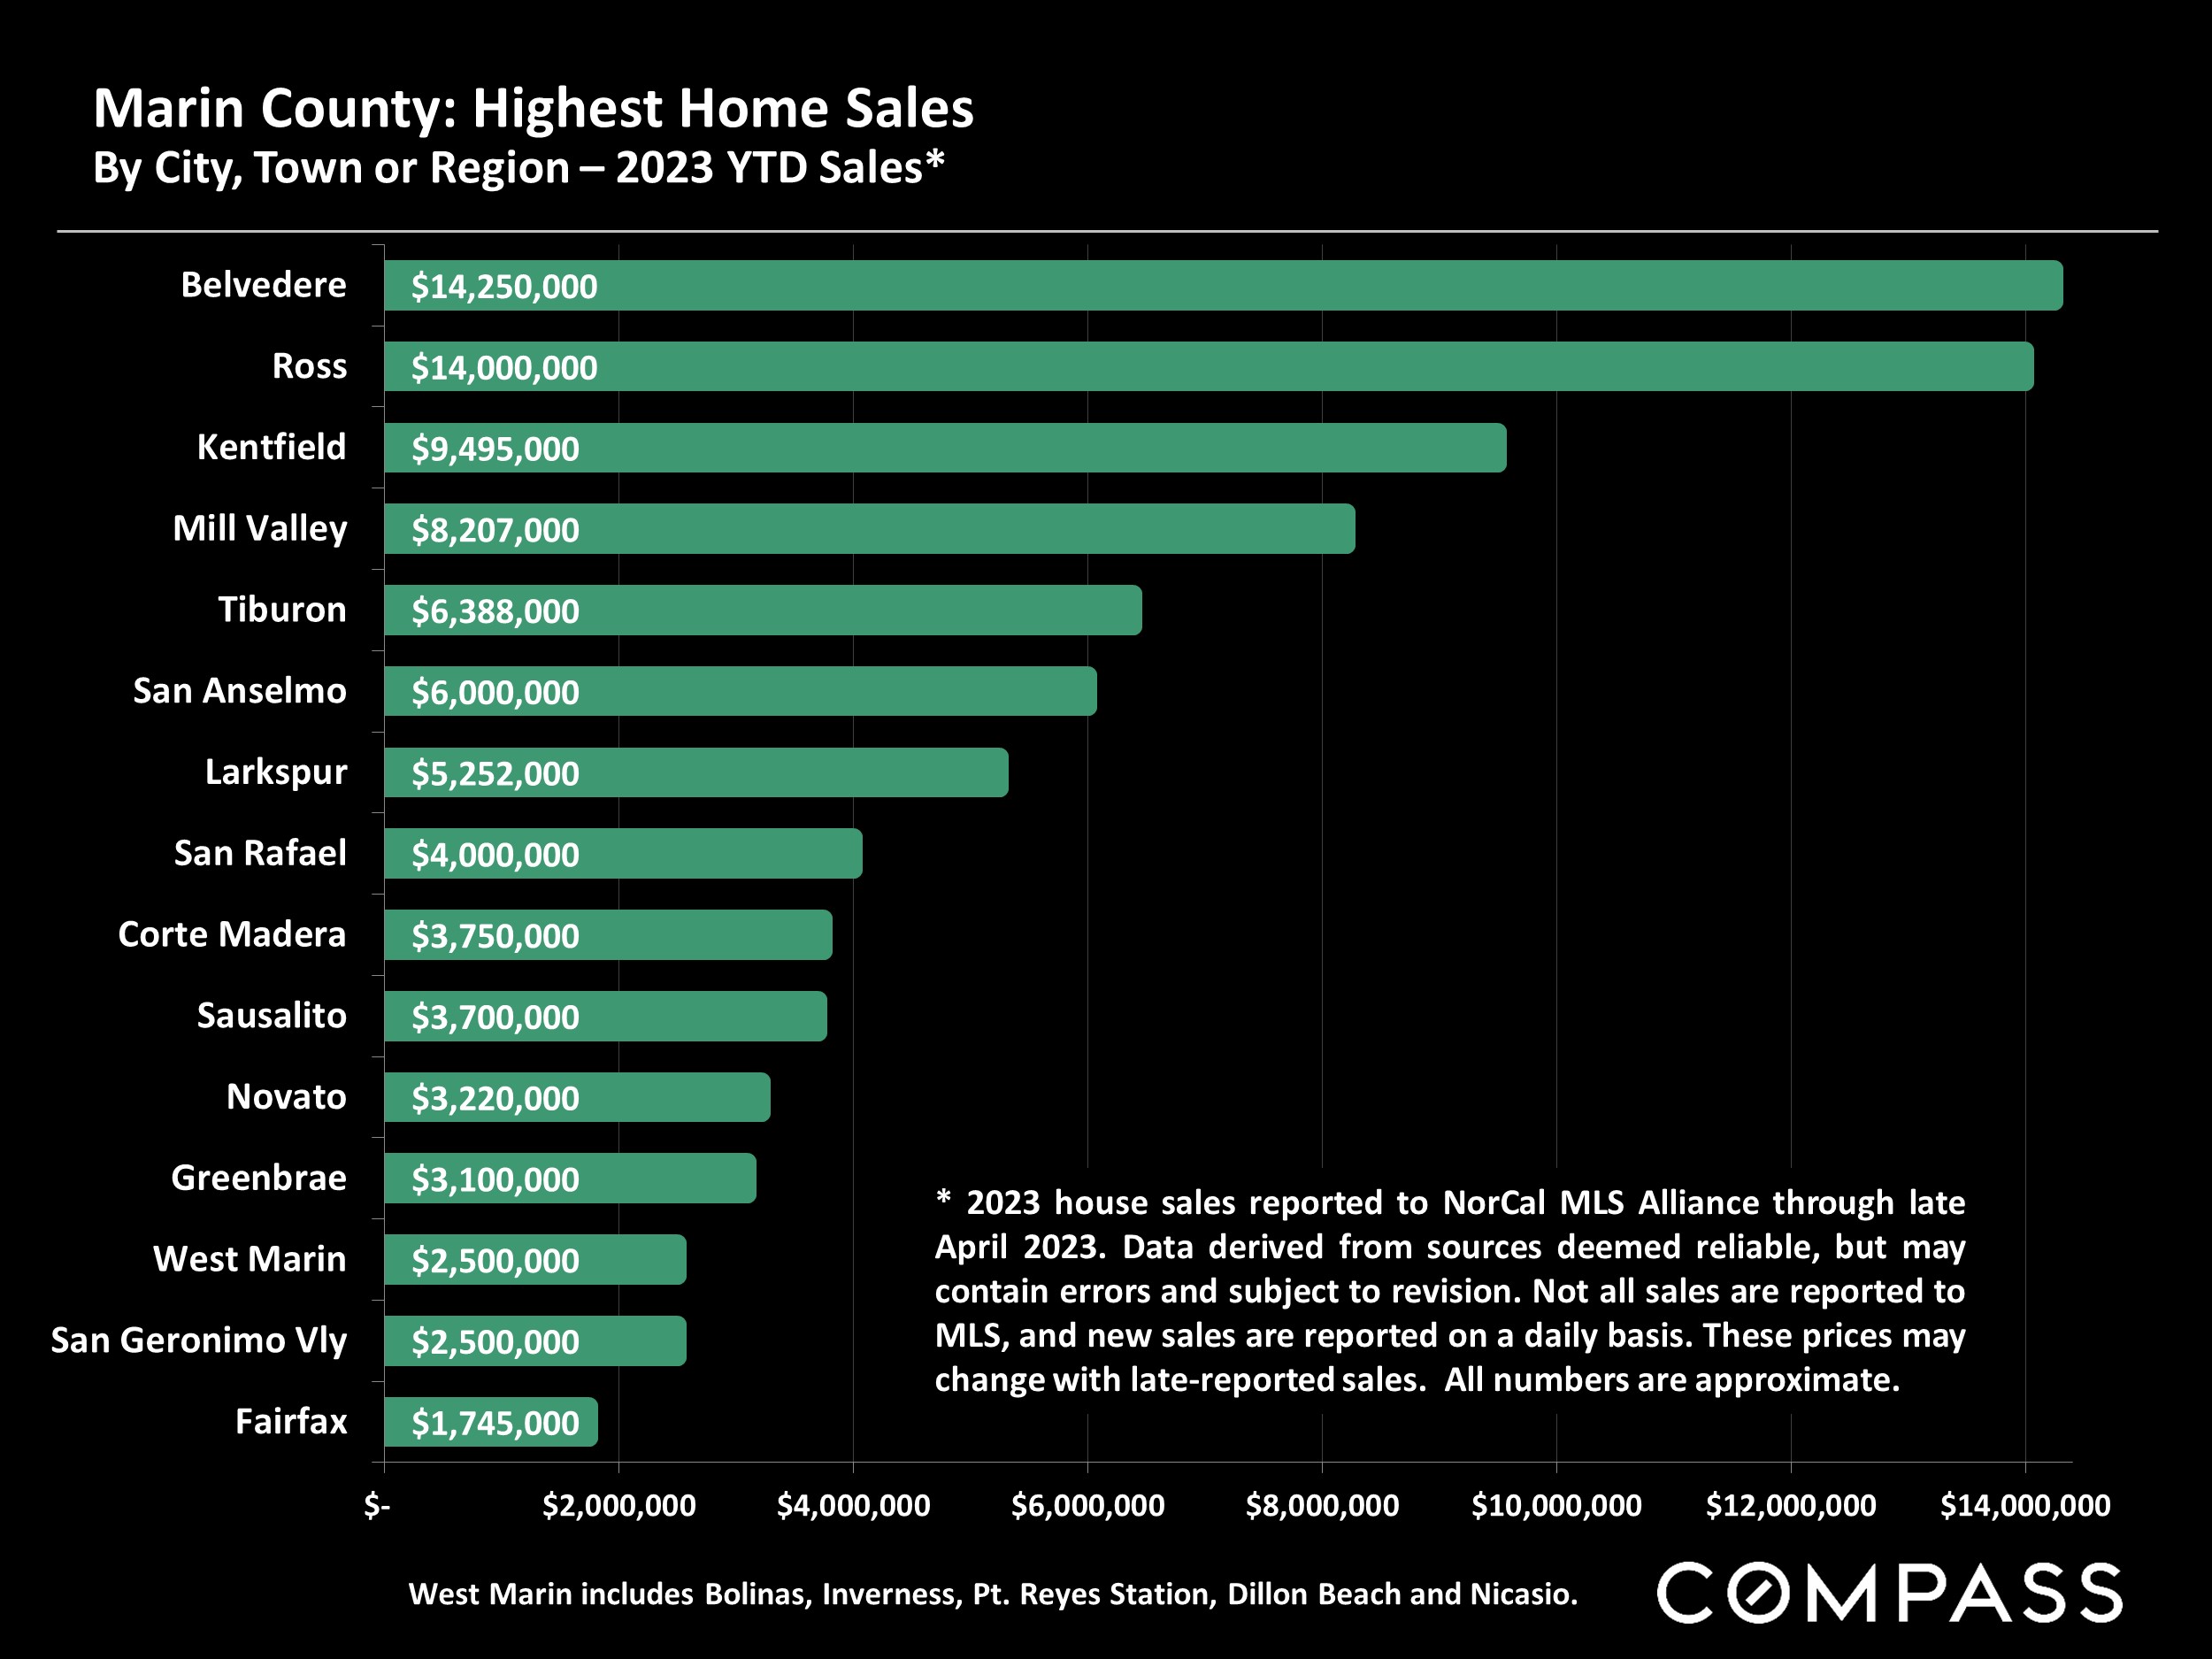 Marin County: Highest Home Sales